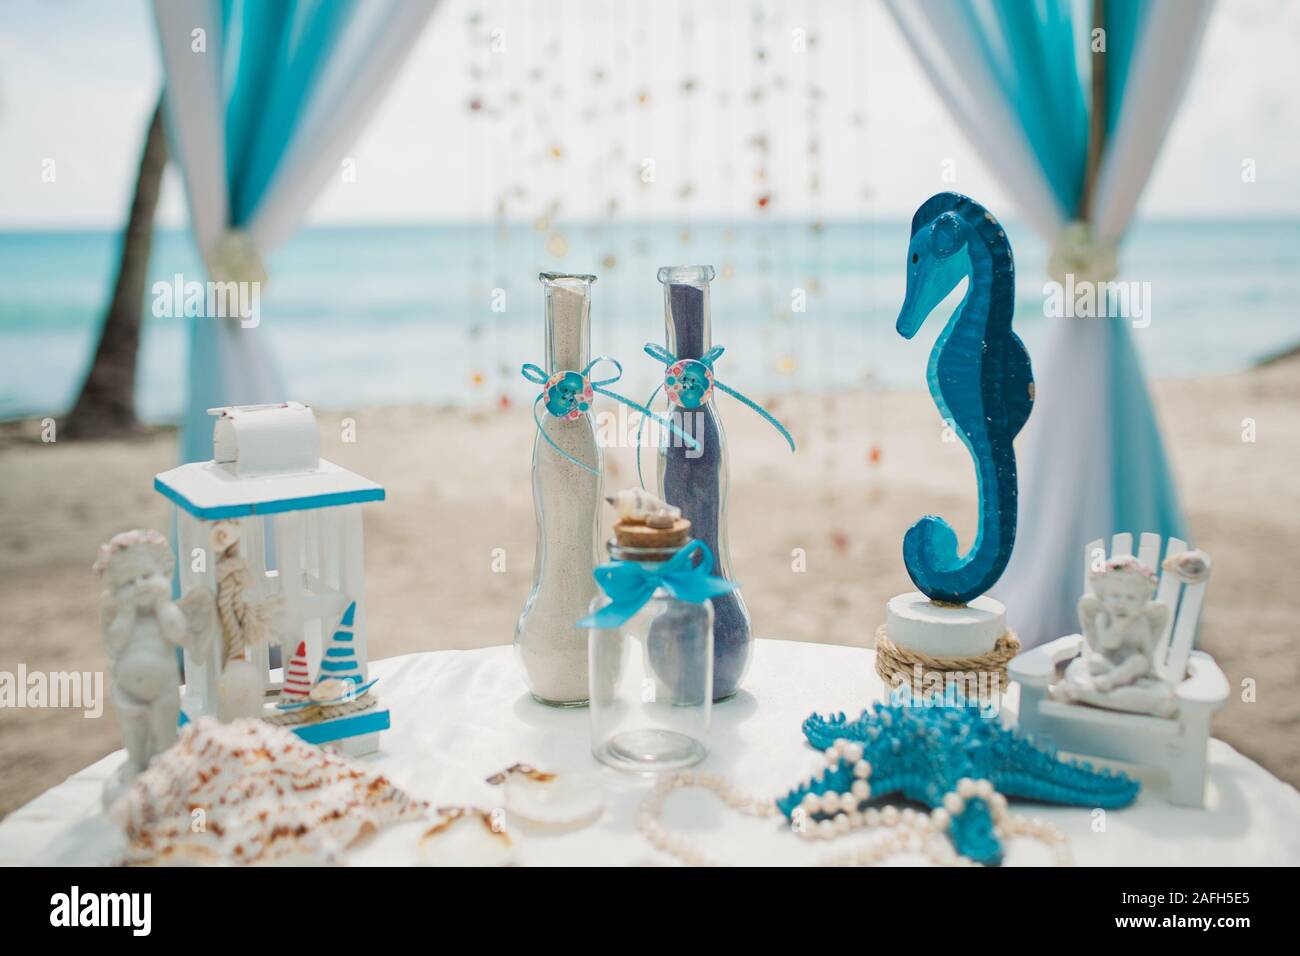 White and blue wedding decorations on a white table on a beach